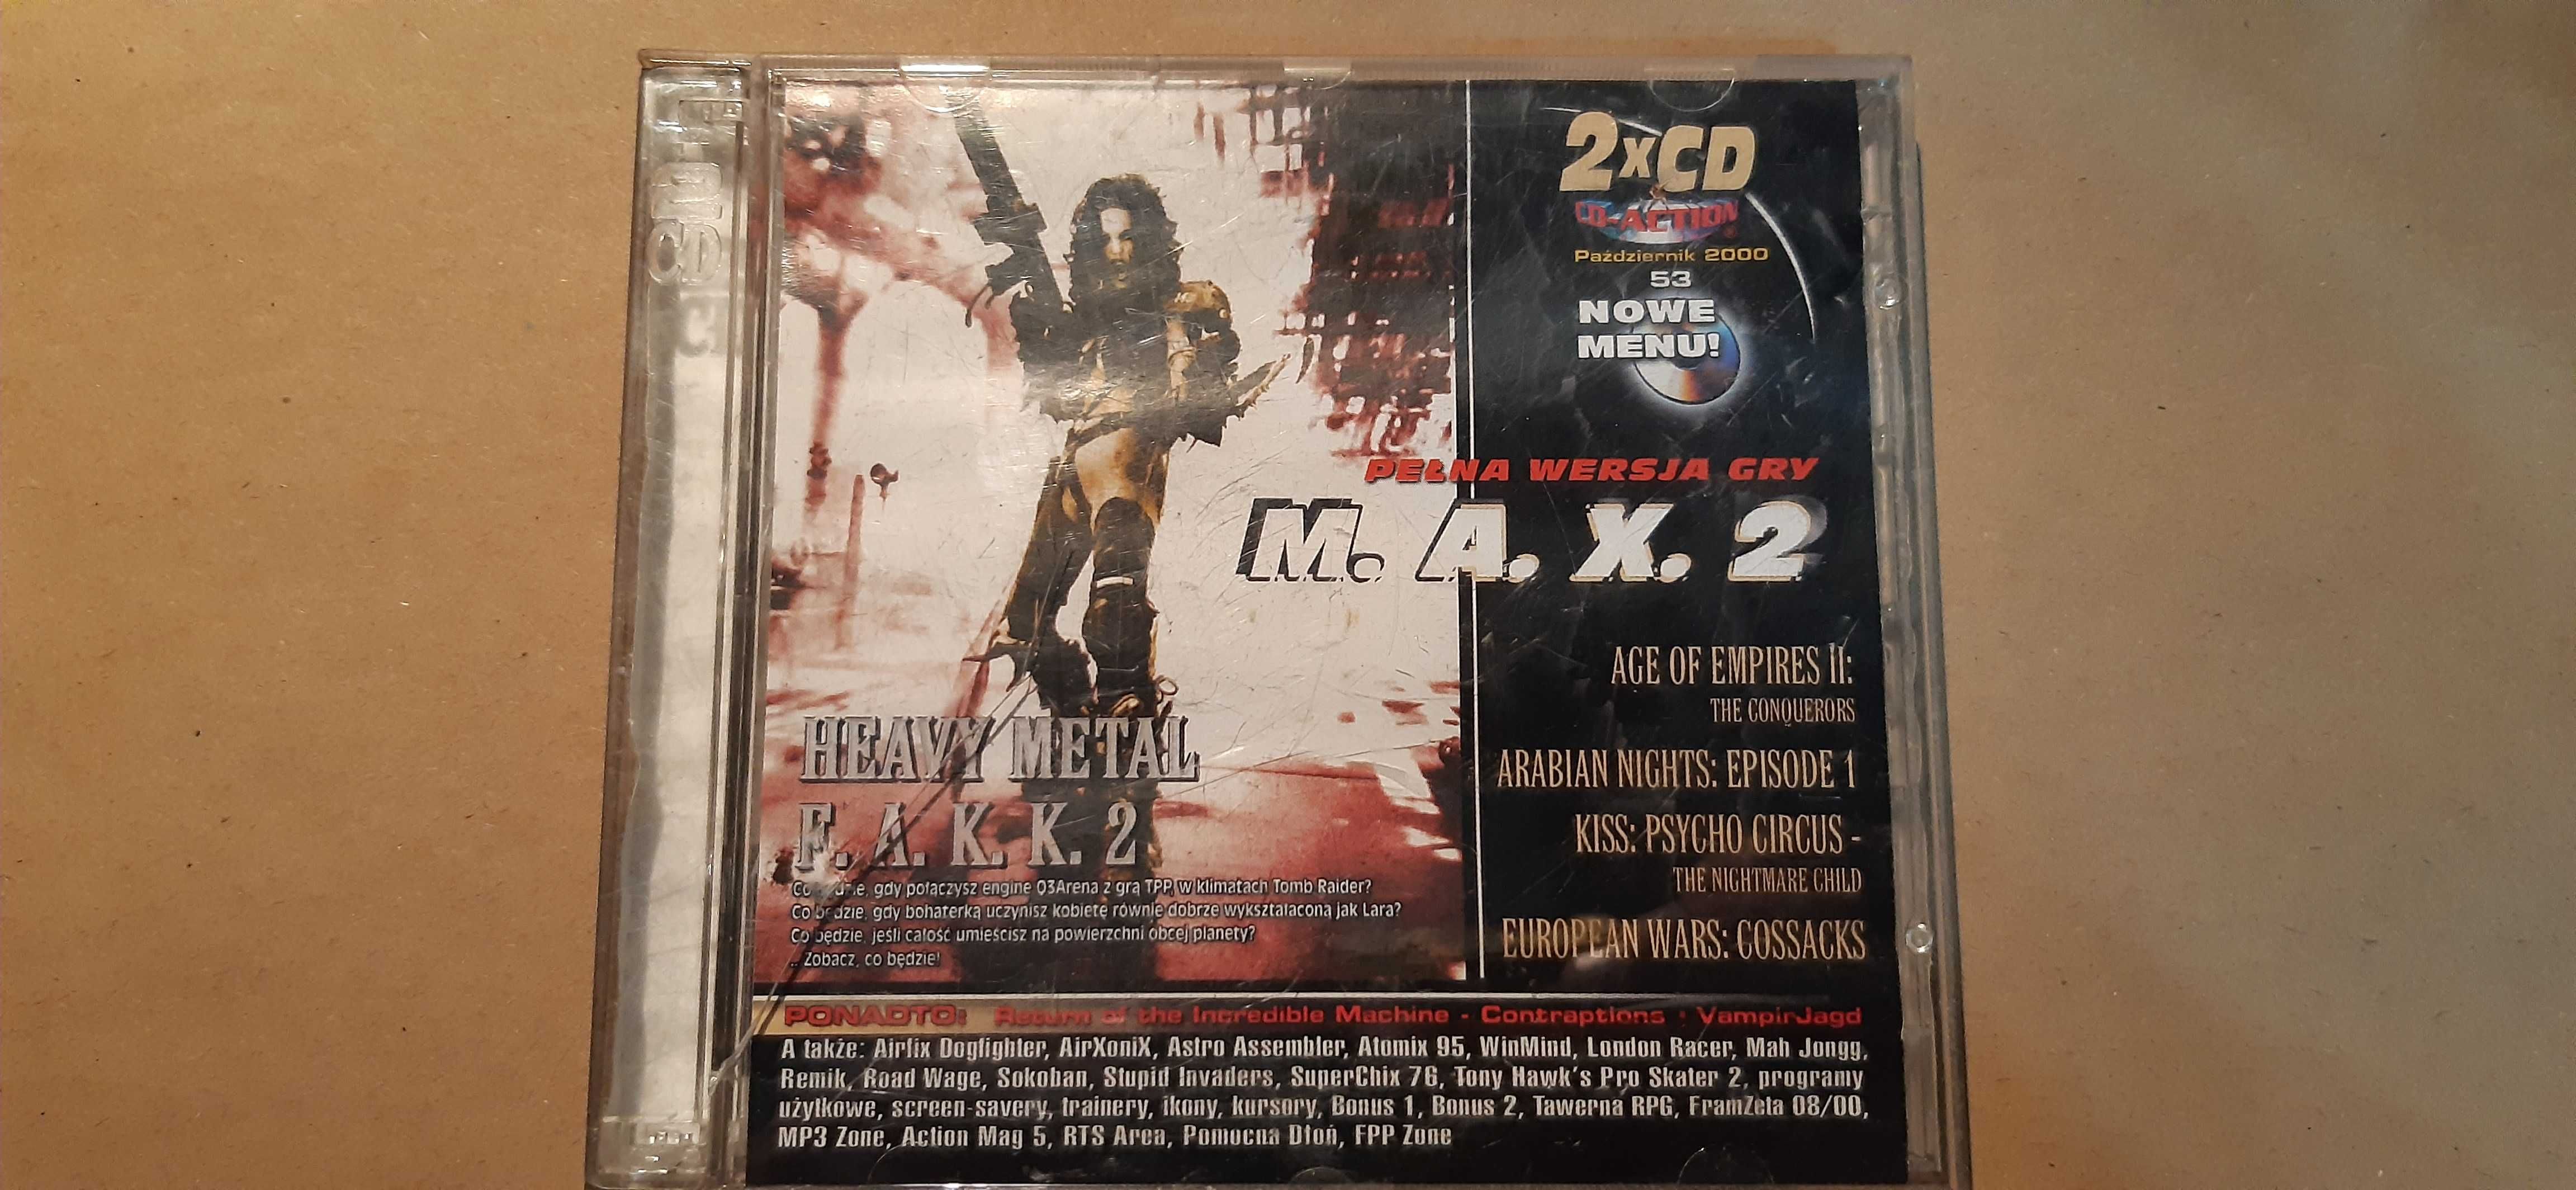 gra pc m.a.x. 2, heavy metal , age of empires cd action 10/2000